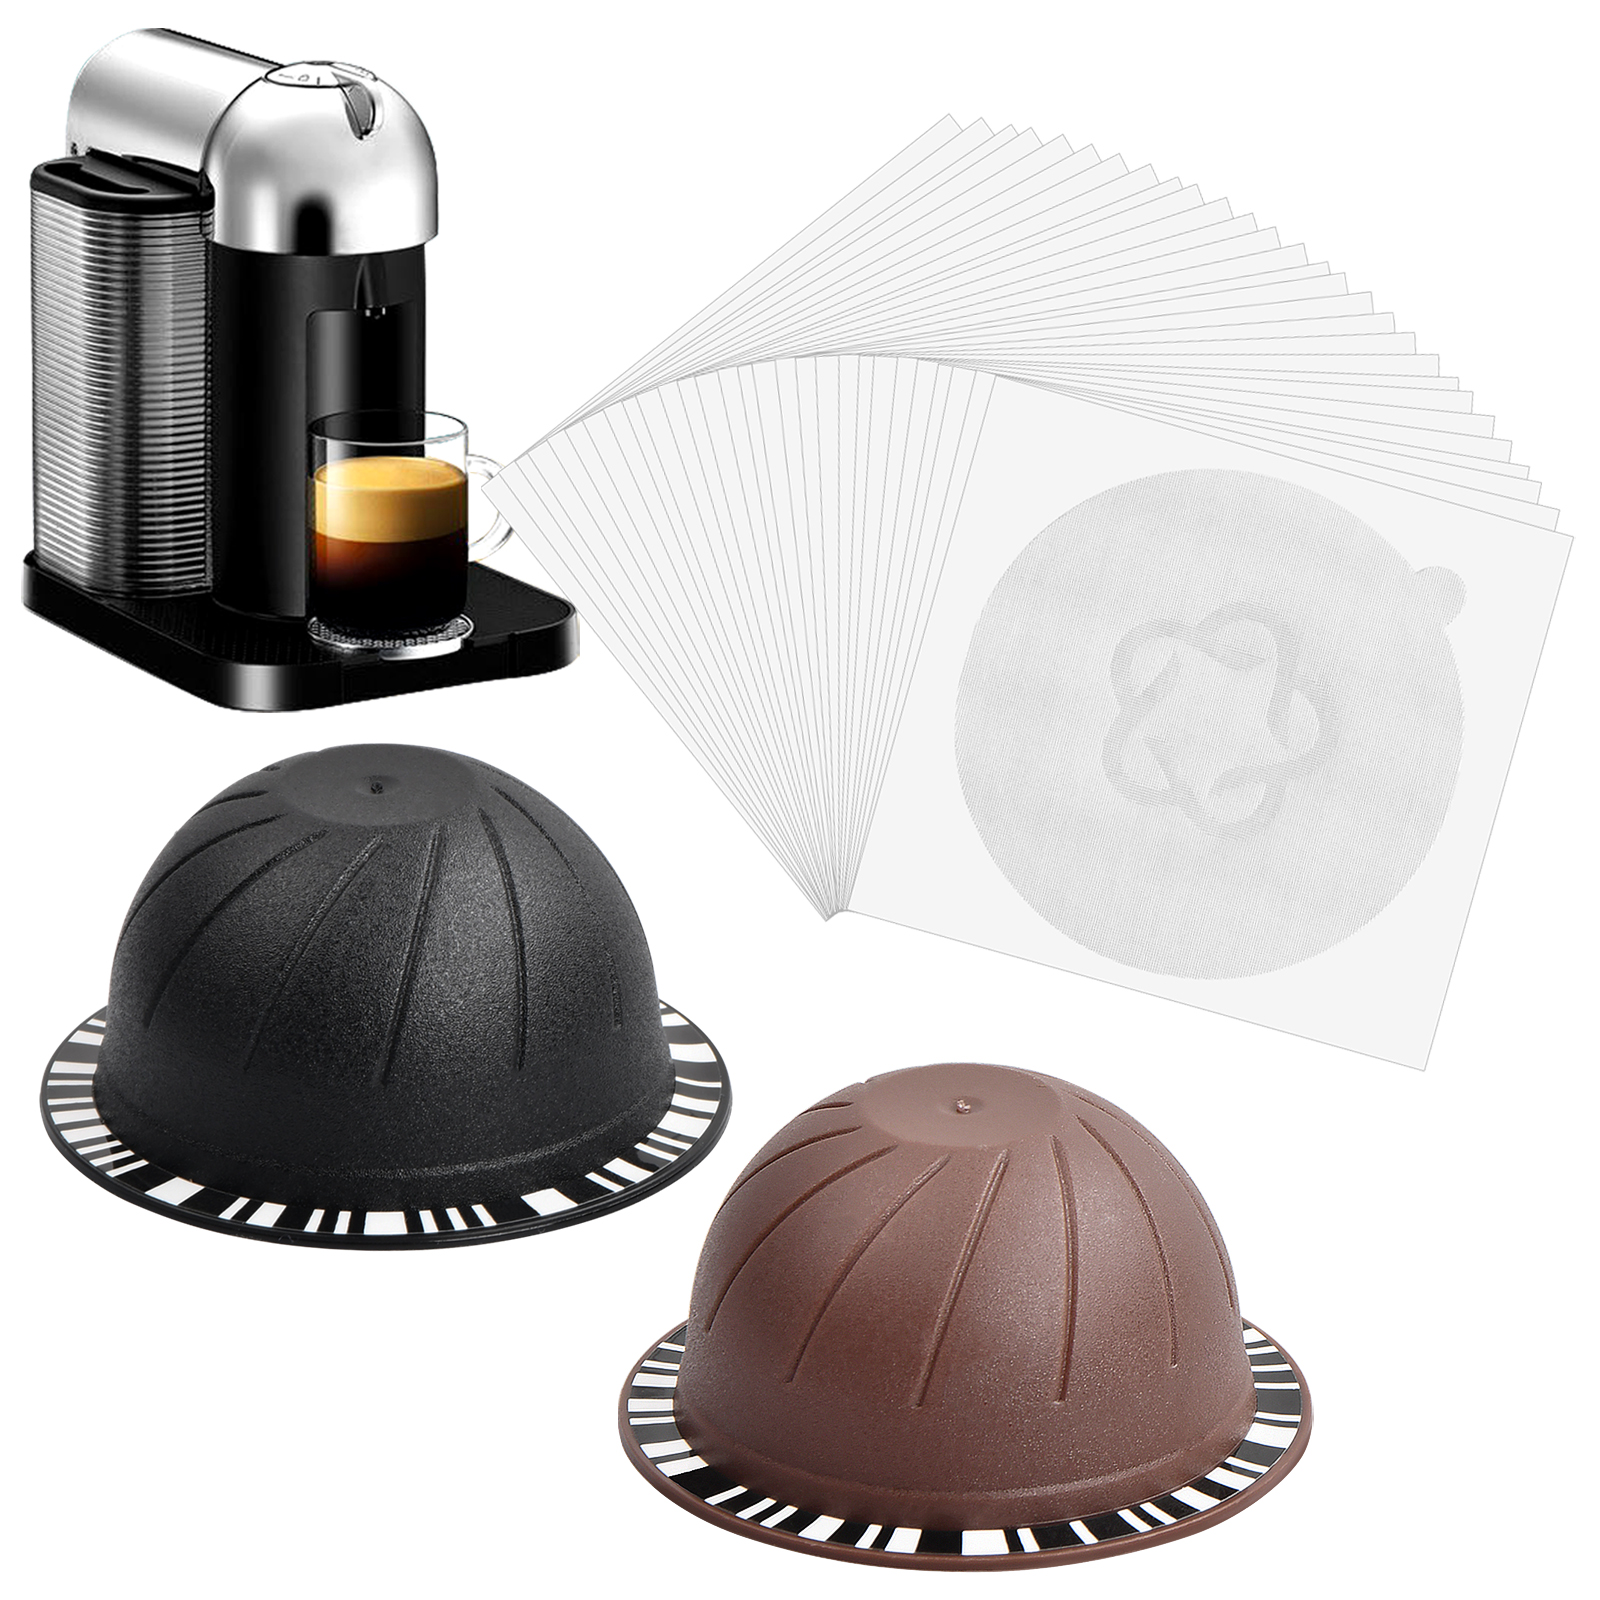  Aieve Reusable Vertuo Capsule Kit Compatible with Nespresso  Pods Vertuo Include 80 pcs Aluminum Foil Seals Lid, Pod Holder, Coffee  Spoon and Lid Opener: Home & Kitchen